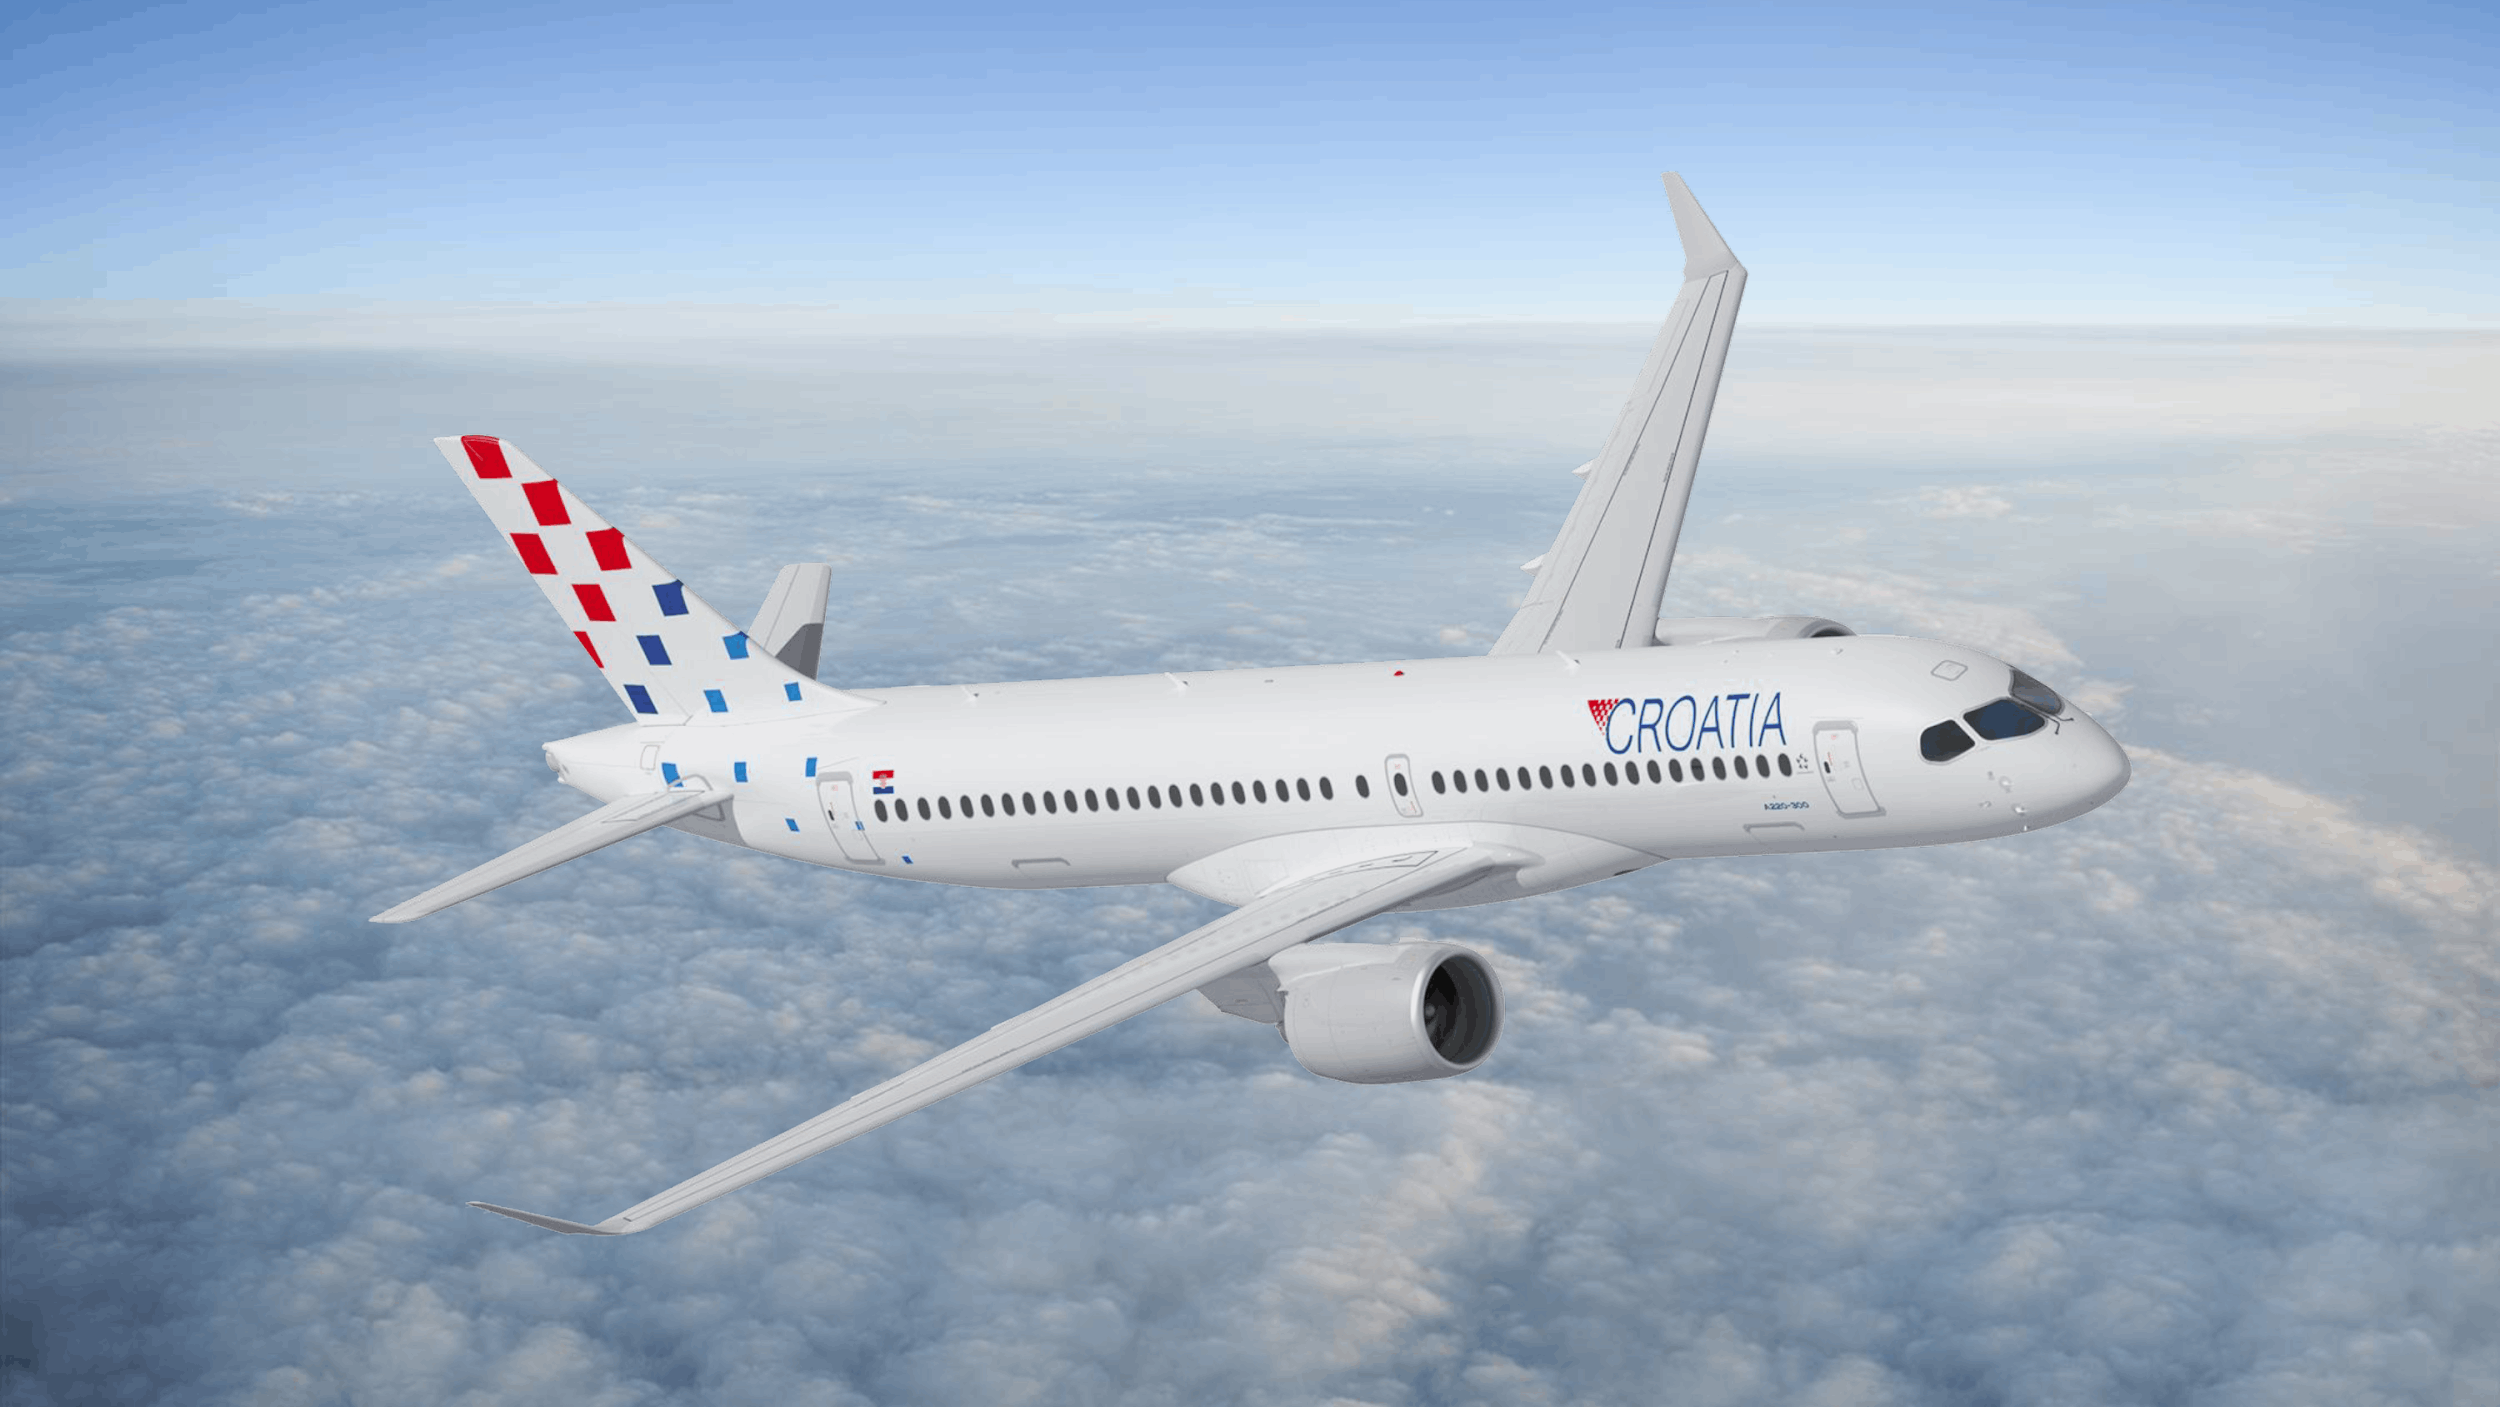 Griffin Confirms A220 Order for Croatia Airlines: Deliveries in 2026